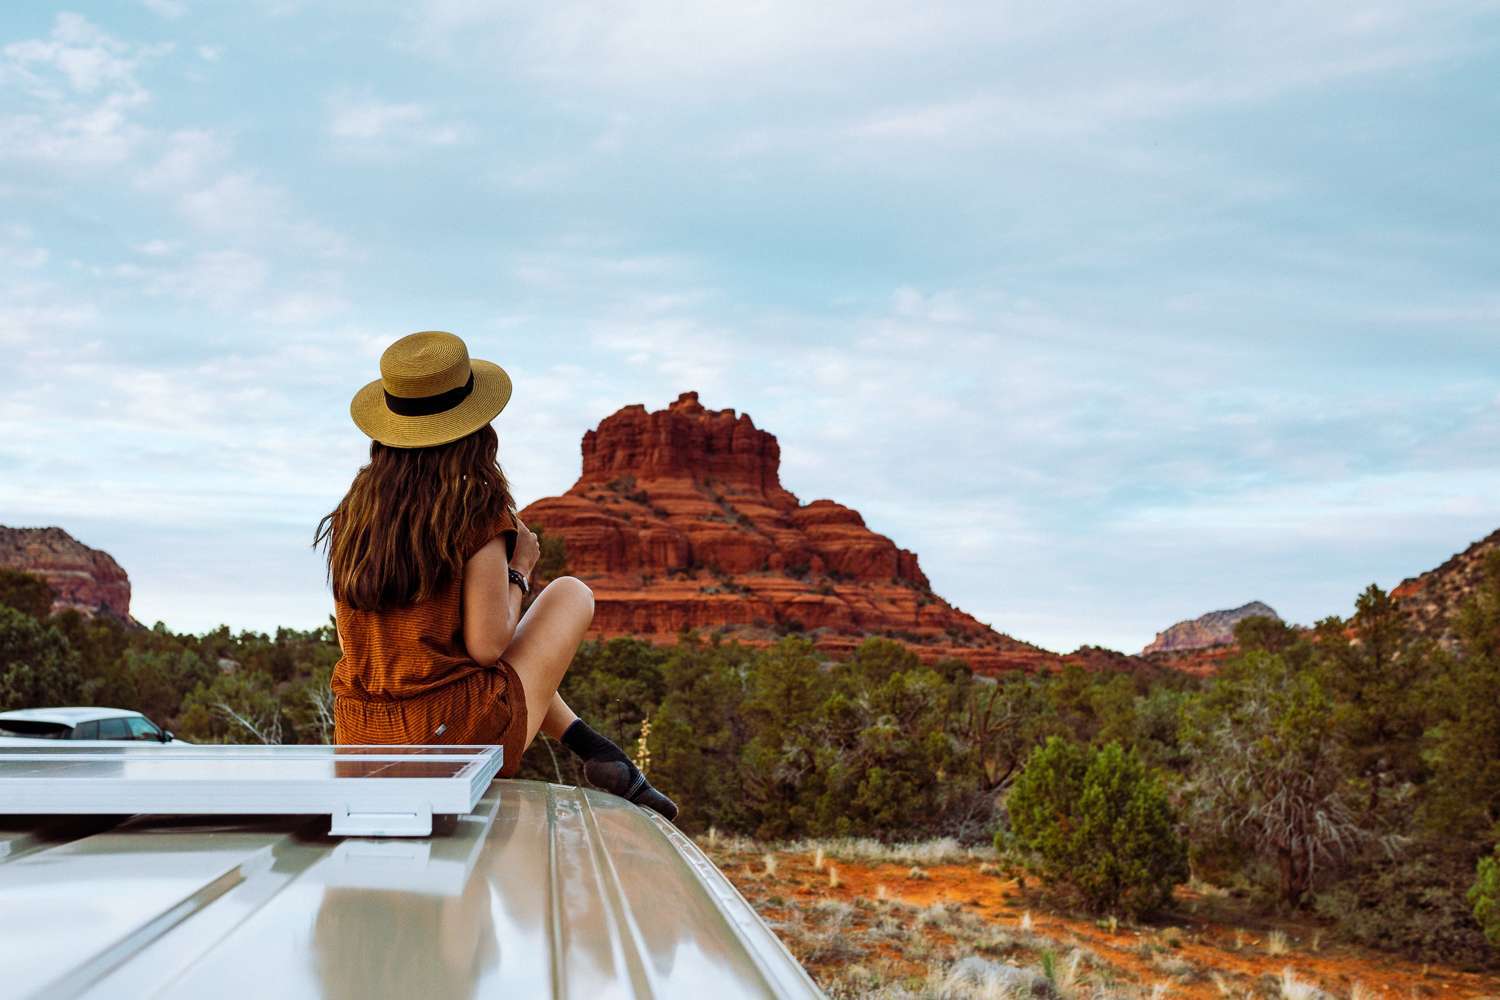 Rachel Off Duty: A Woman Sits on a Campervan in Sedona, USA